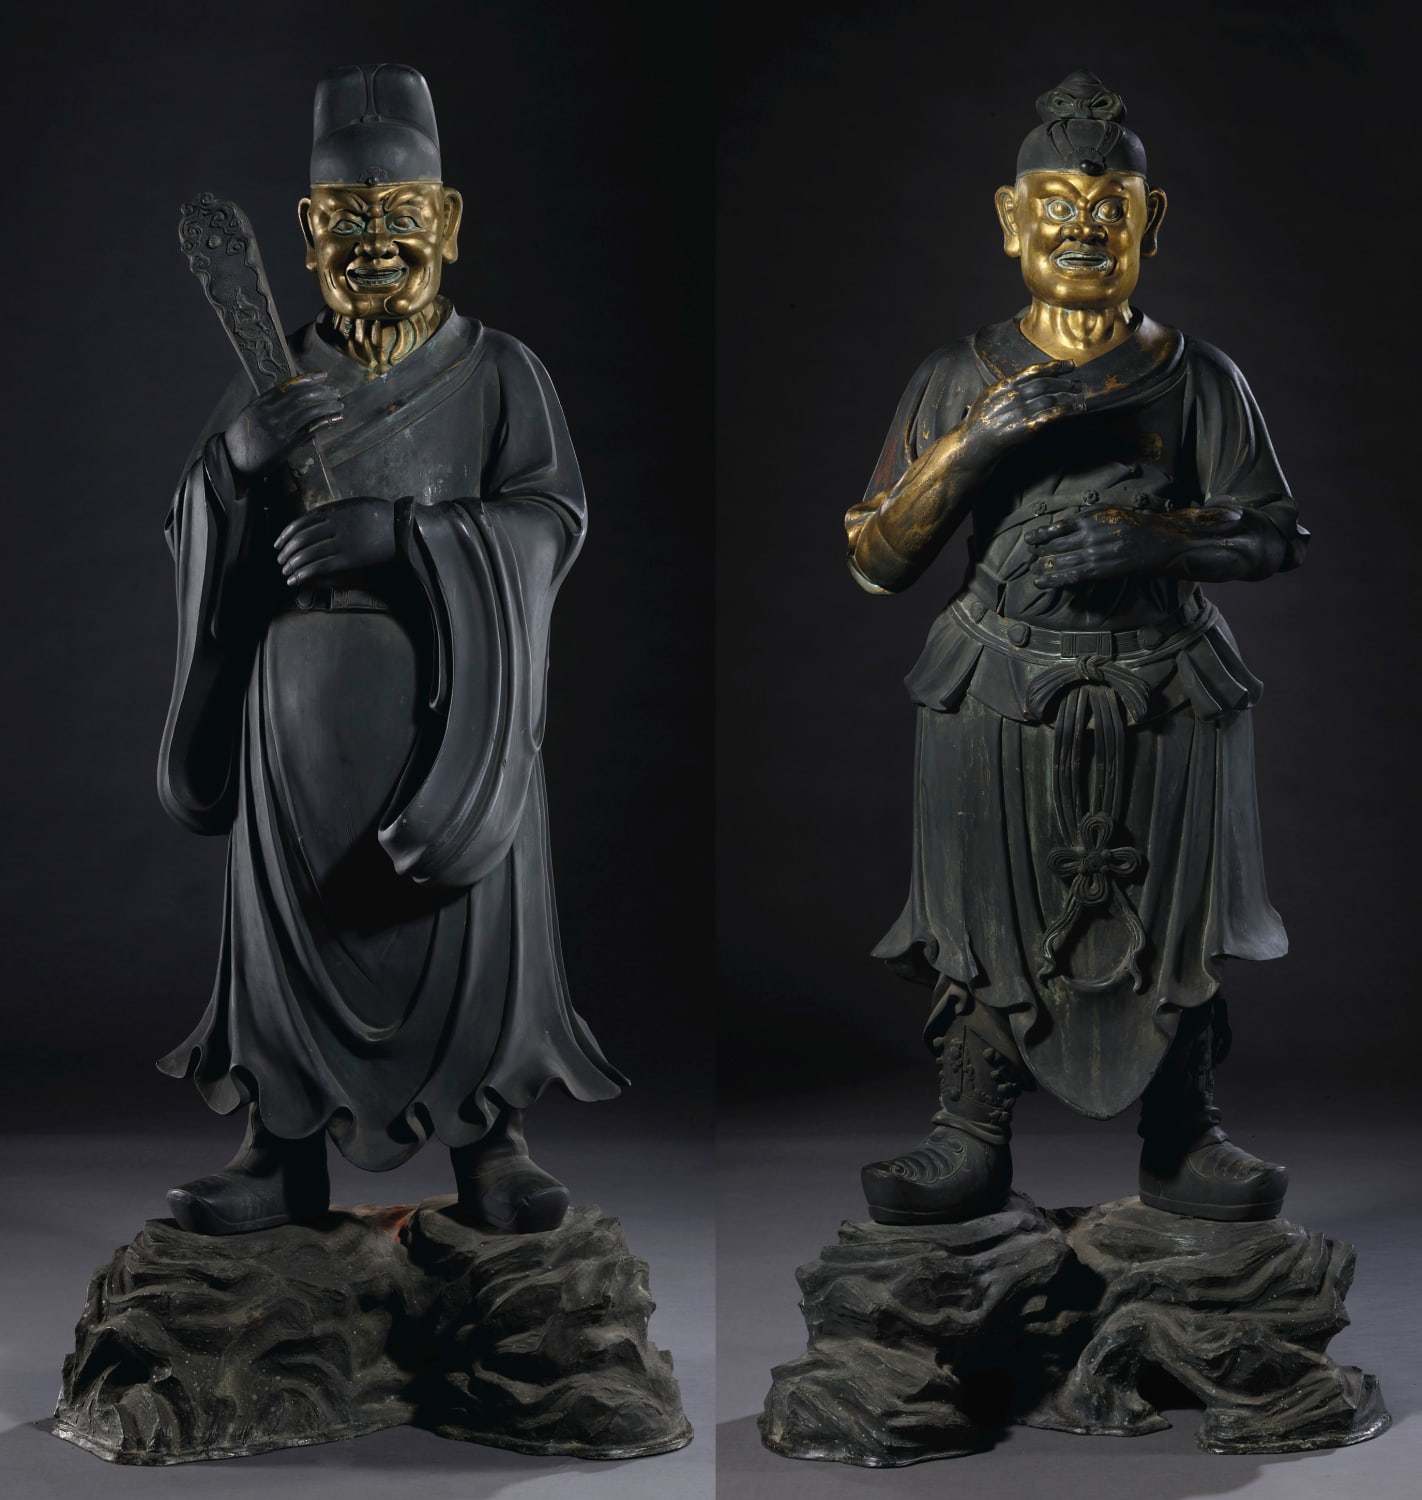 Two bronze statues of deities with gilded faces. China, Ming dynasty, 16th-17th century